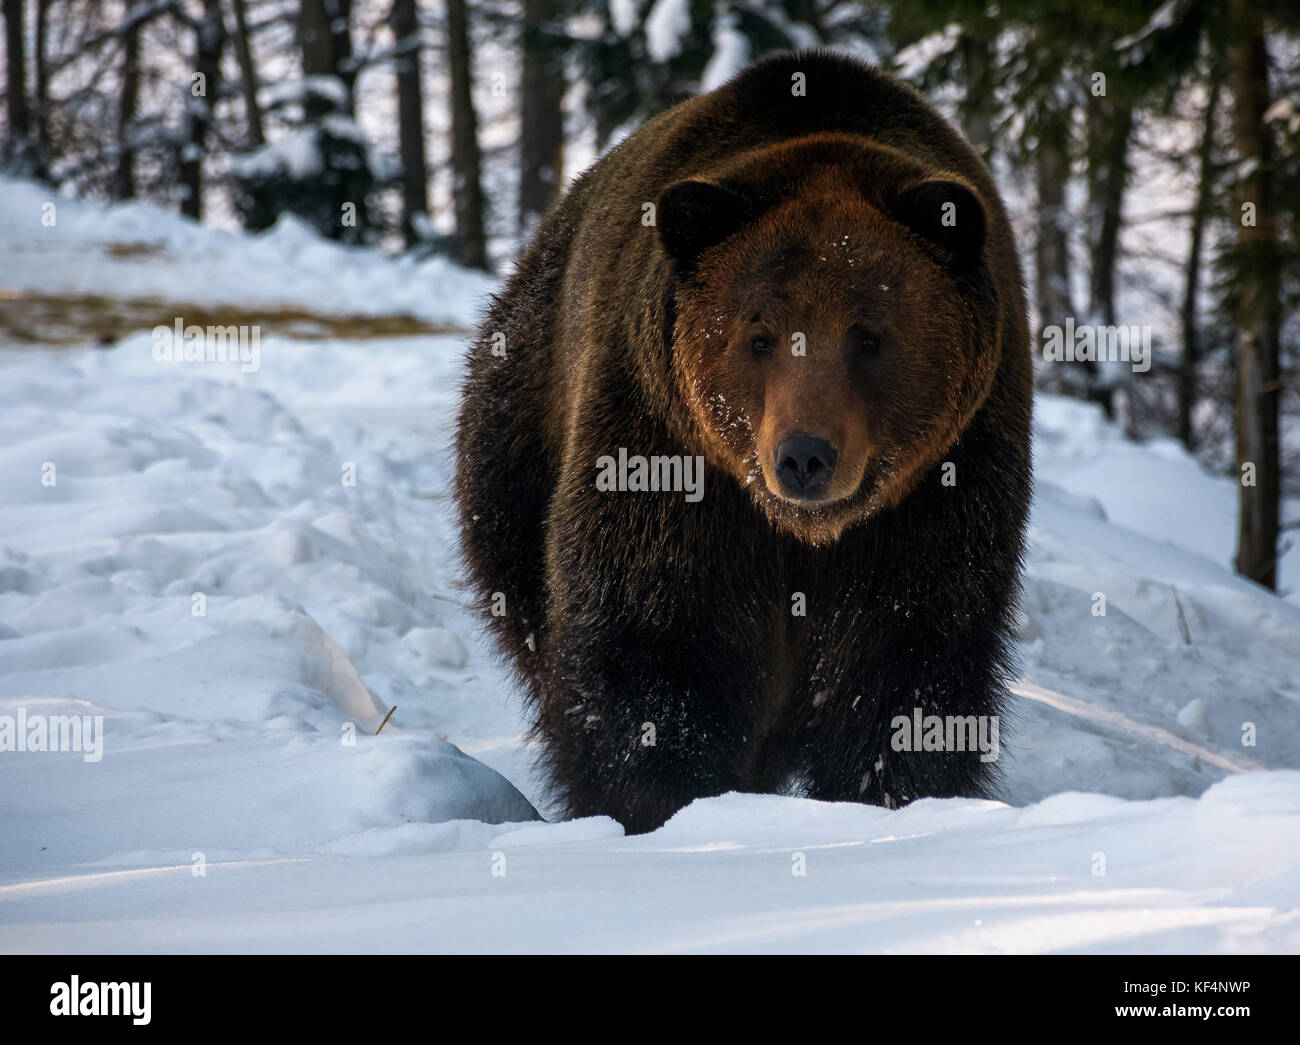 brown bear walking in the winter forest. lovely wildlife scenery Stock Photo